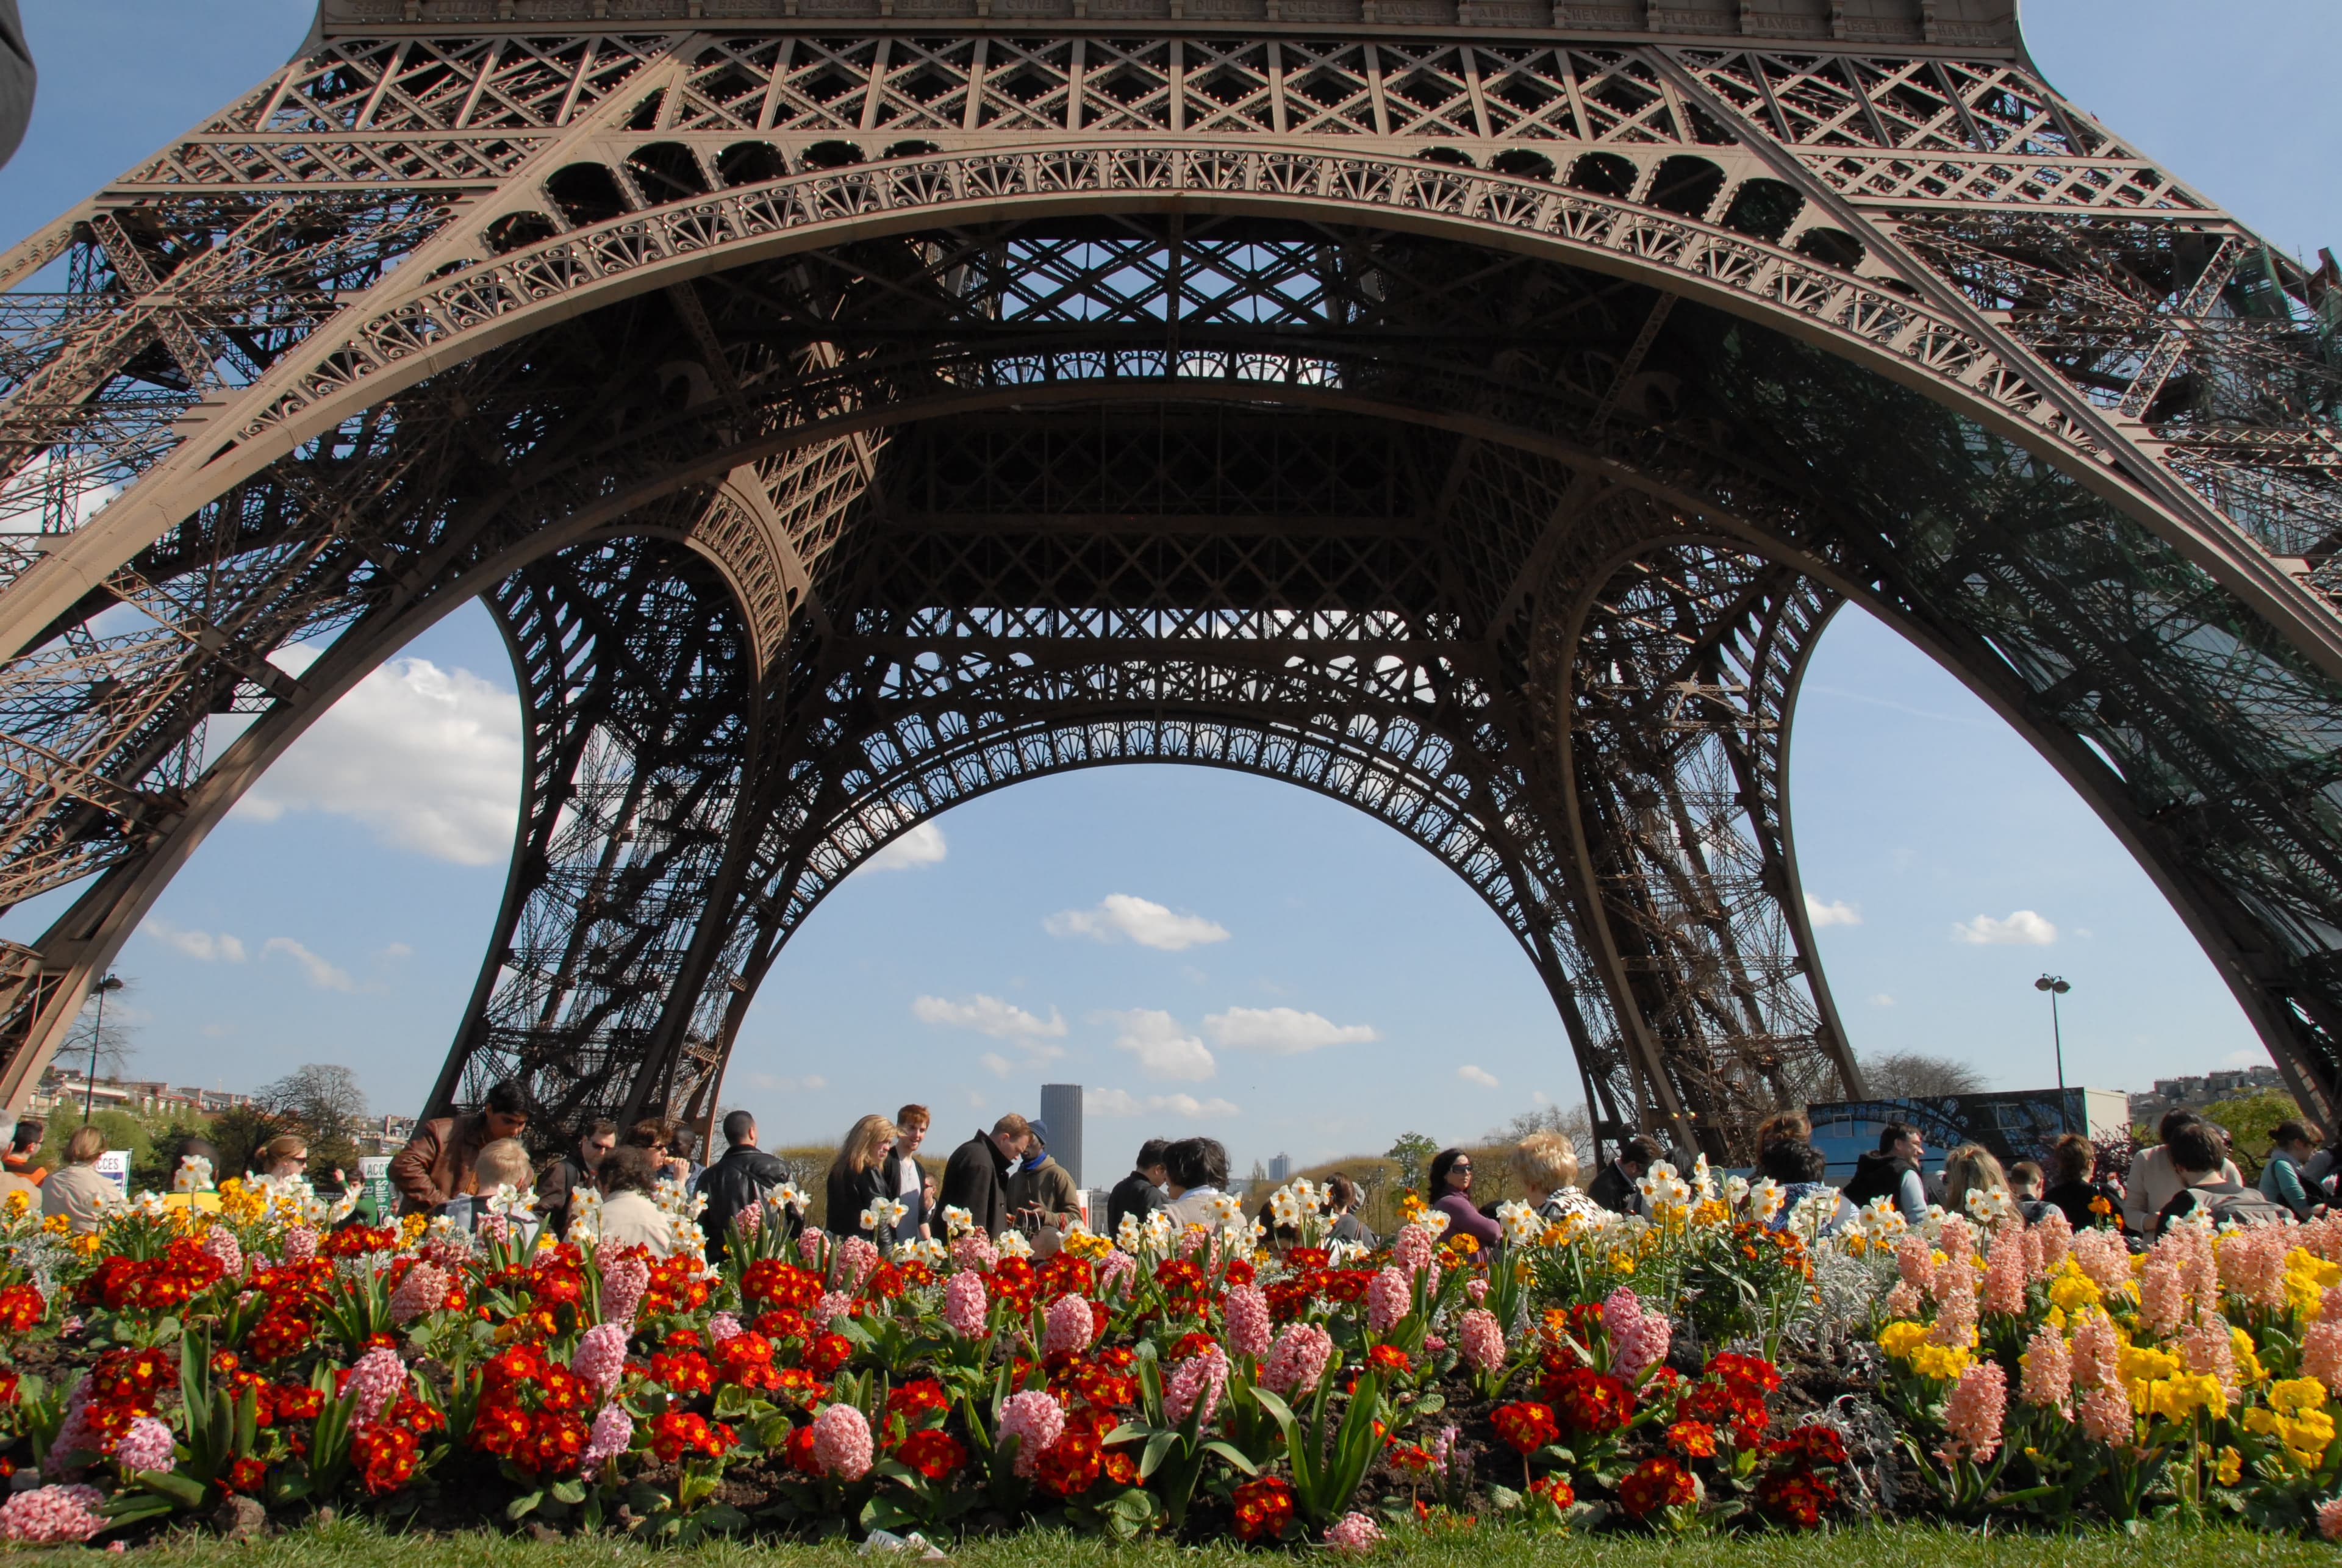 The Eiffel Tower in Paris in the spring